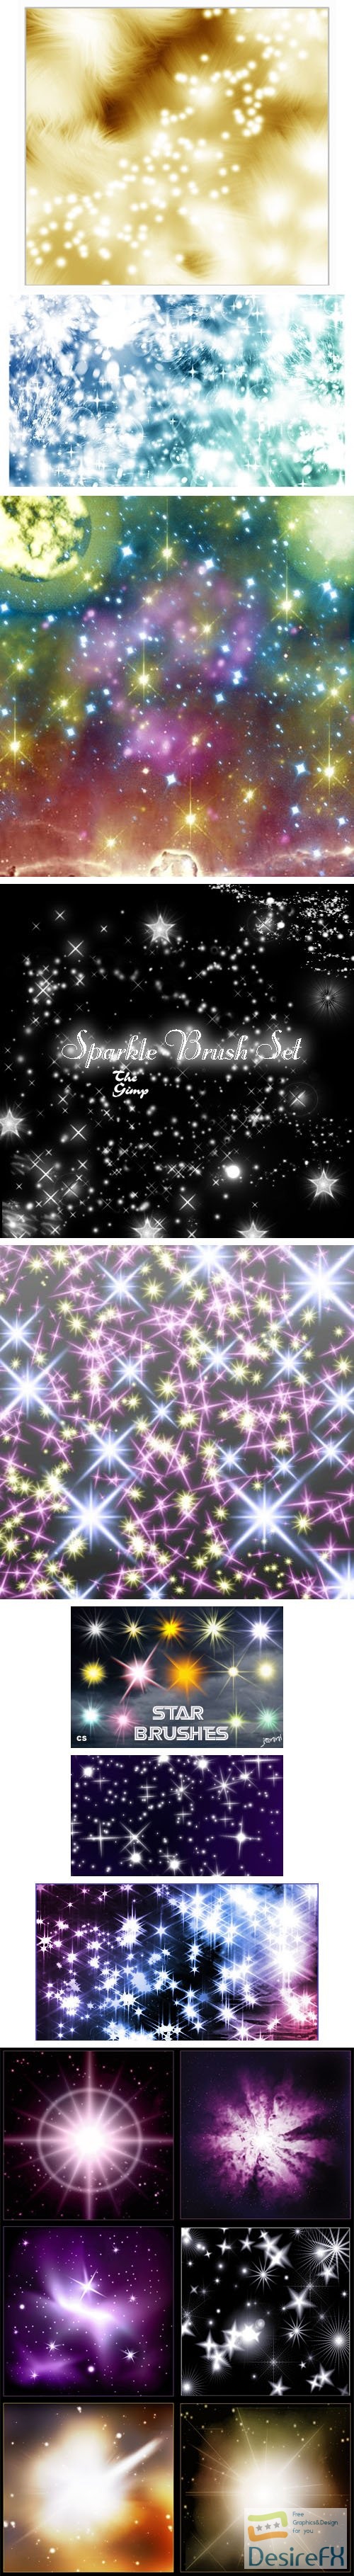 Stars, Flames and Sparkles Brushes Collection for Photoshop